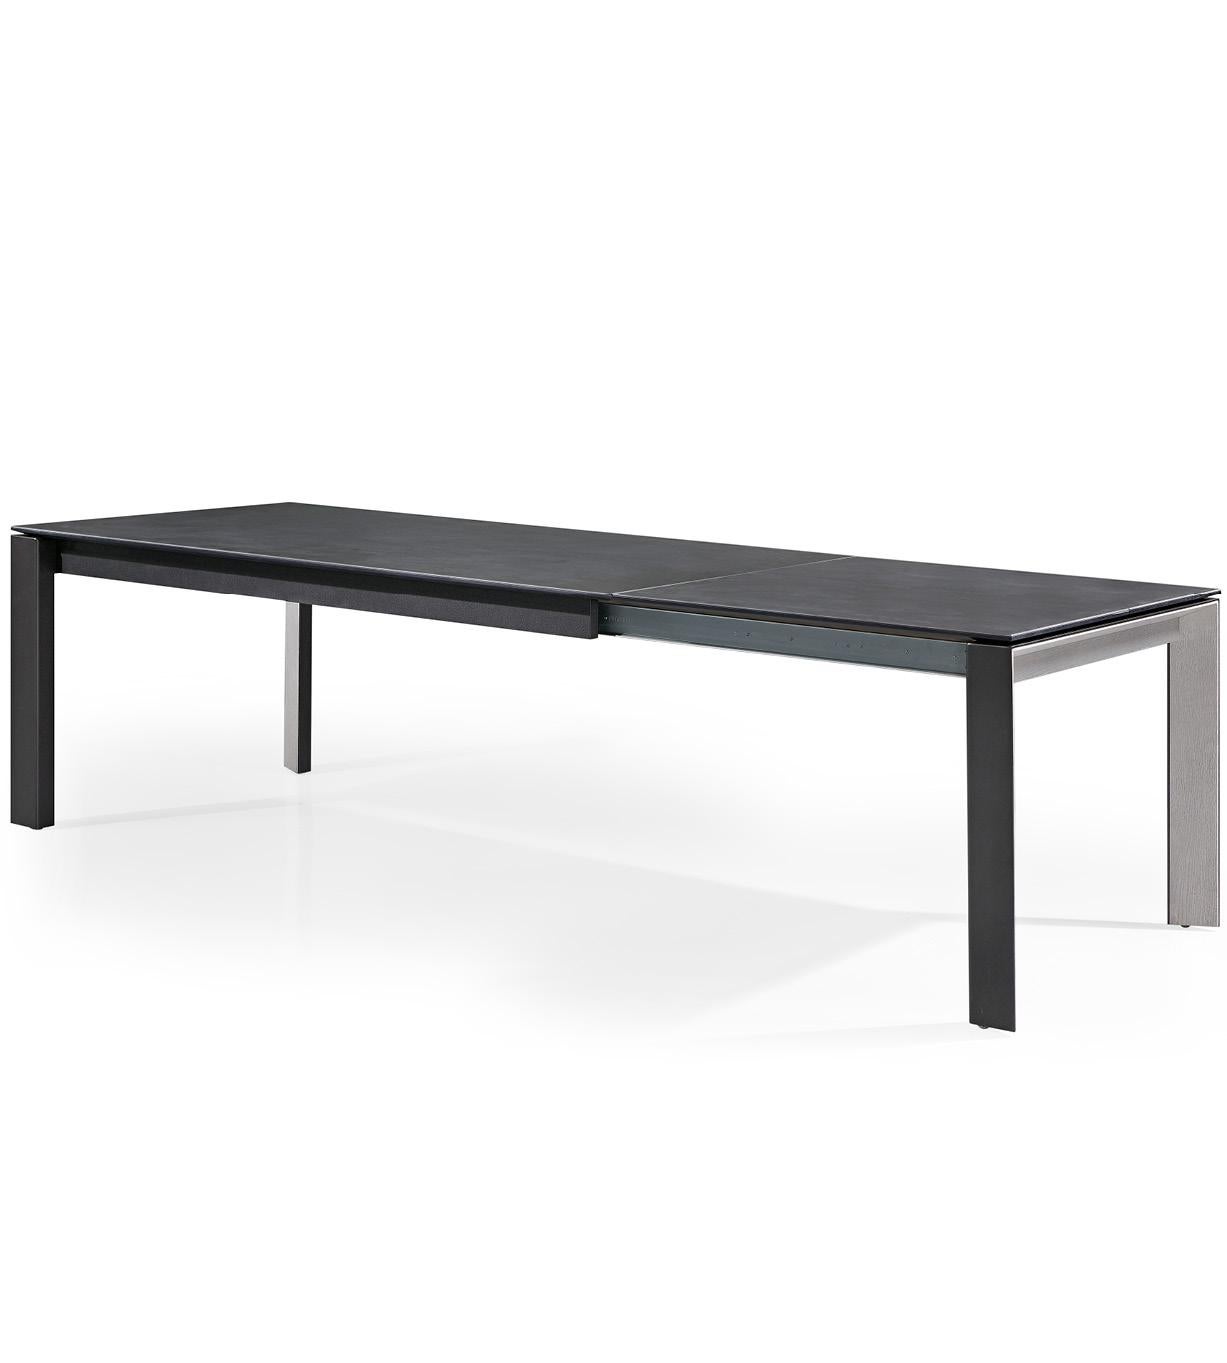 A classic dining table with a ceramic table top and extension. Sits comfortably 6 (+4) people.